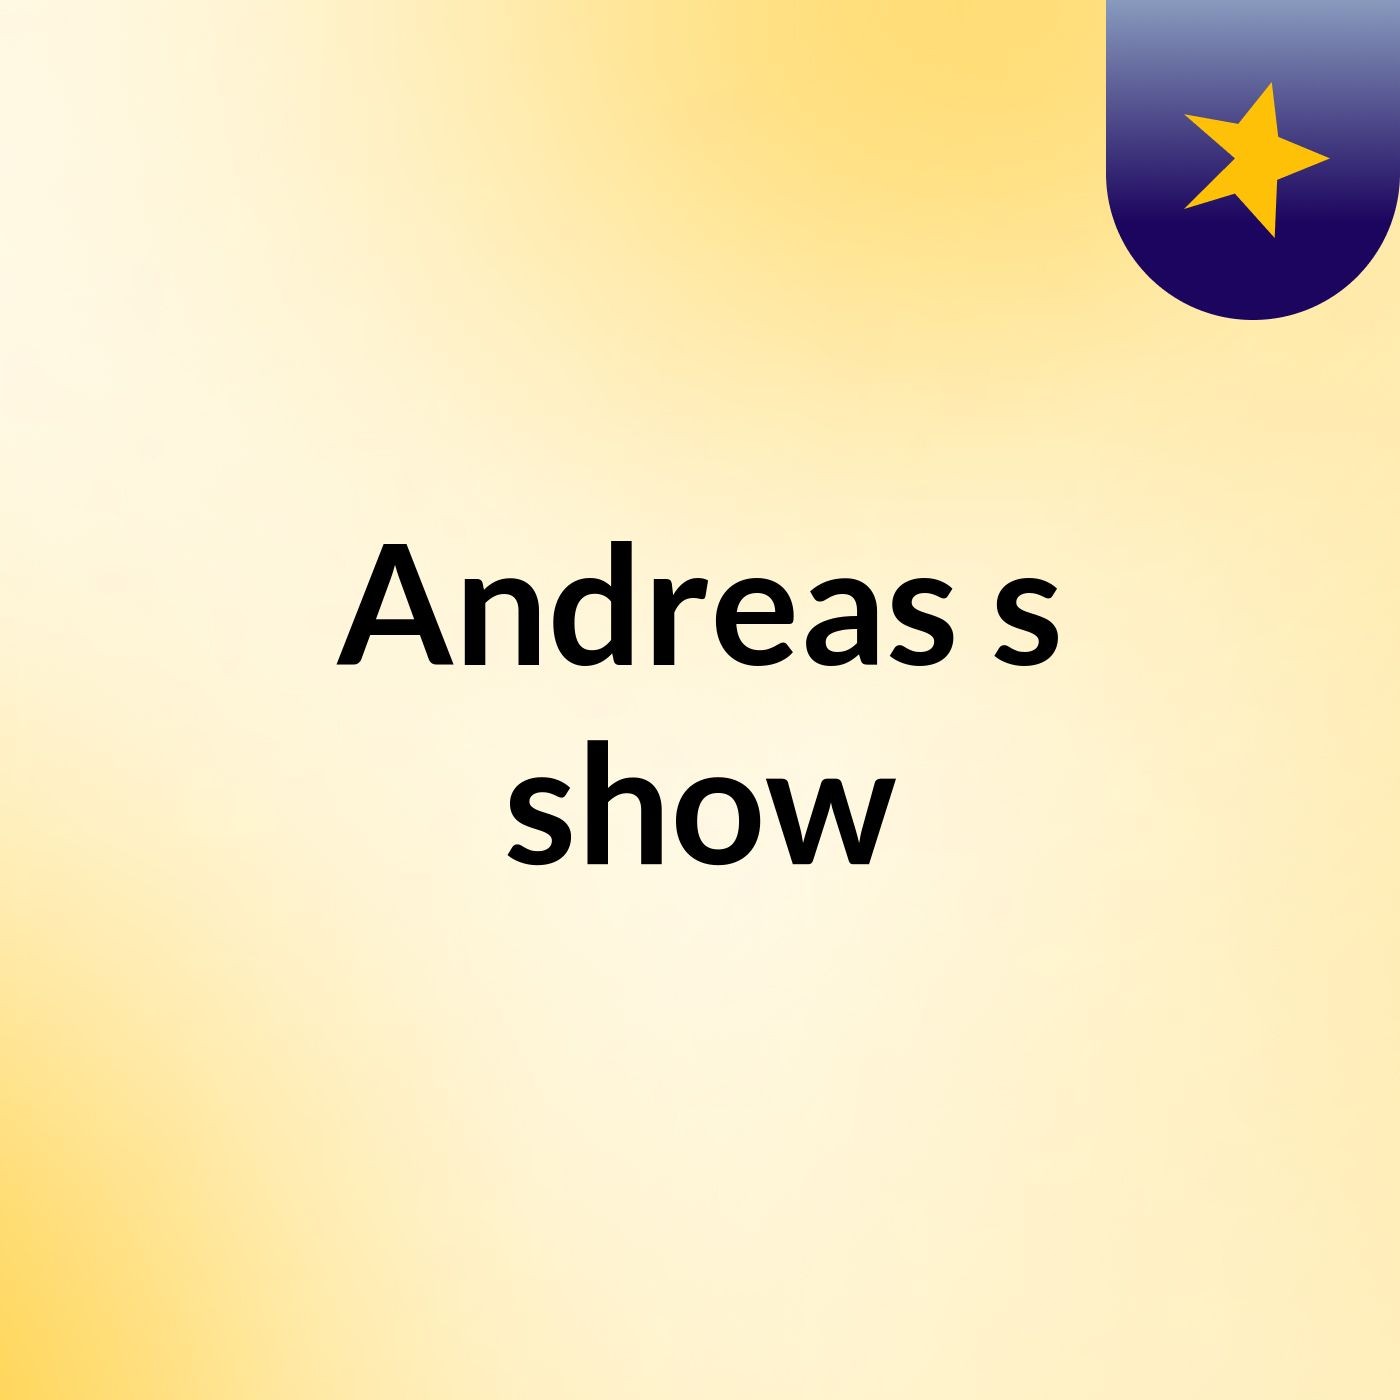 Andreas's show